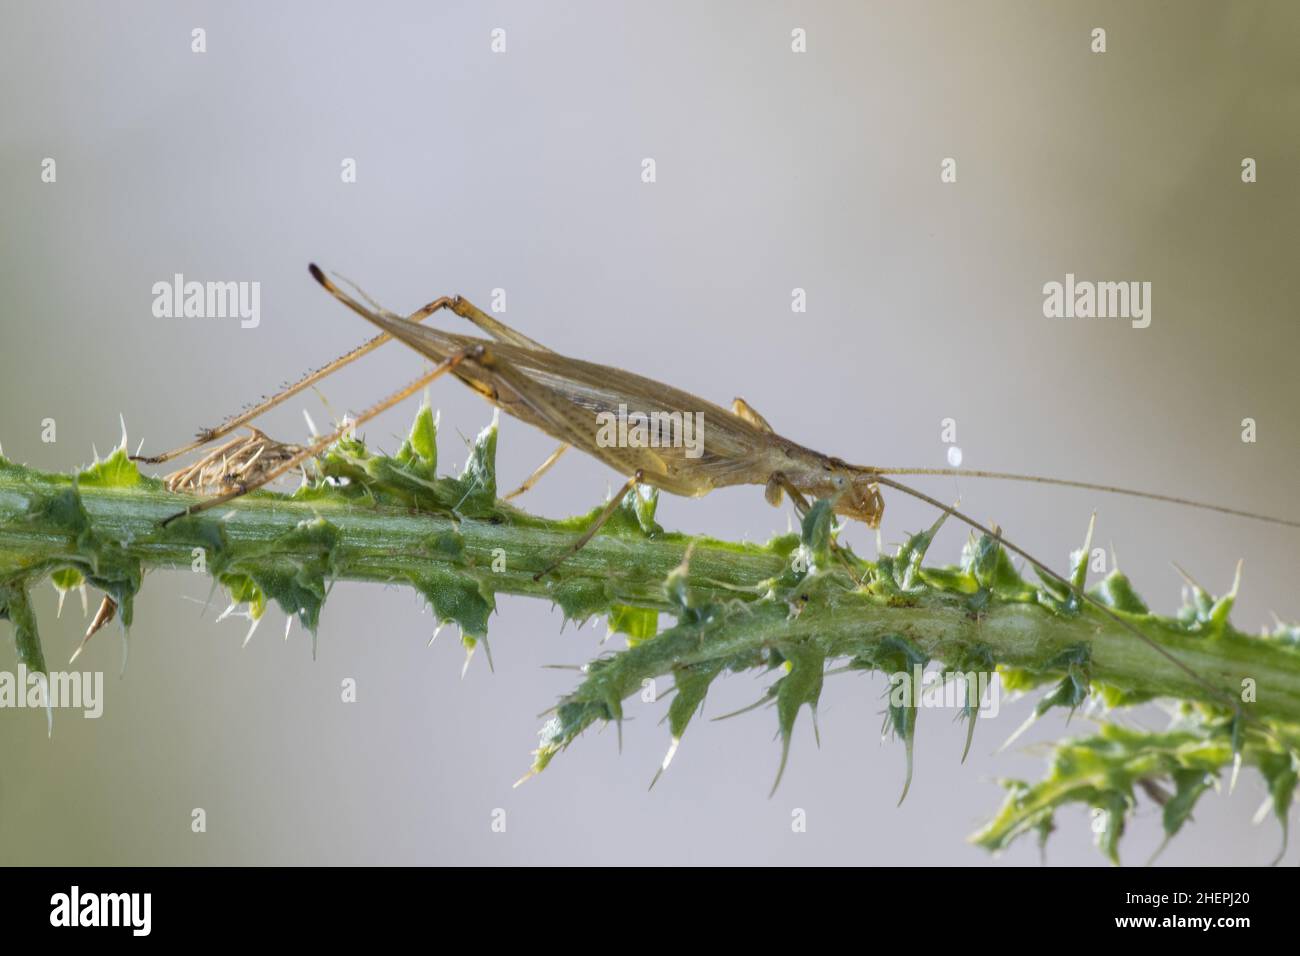 fragile whistling cricket, European tree cricket, Italian cricket (Oecanthus pellucens), on the stem of a thistle, Germany Stock Photo